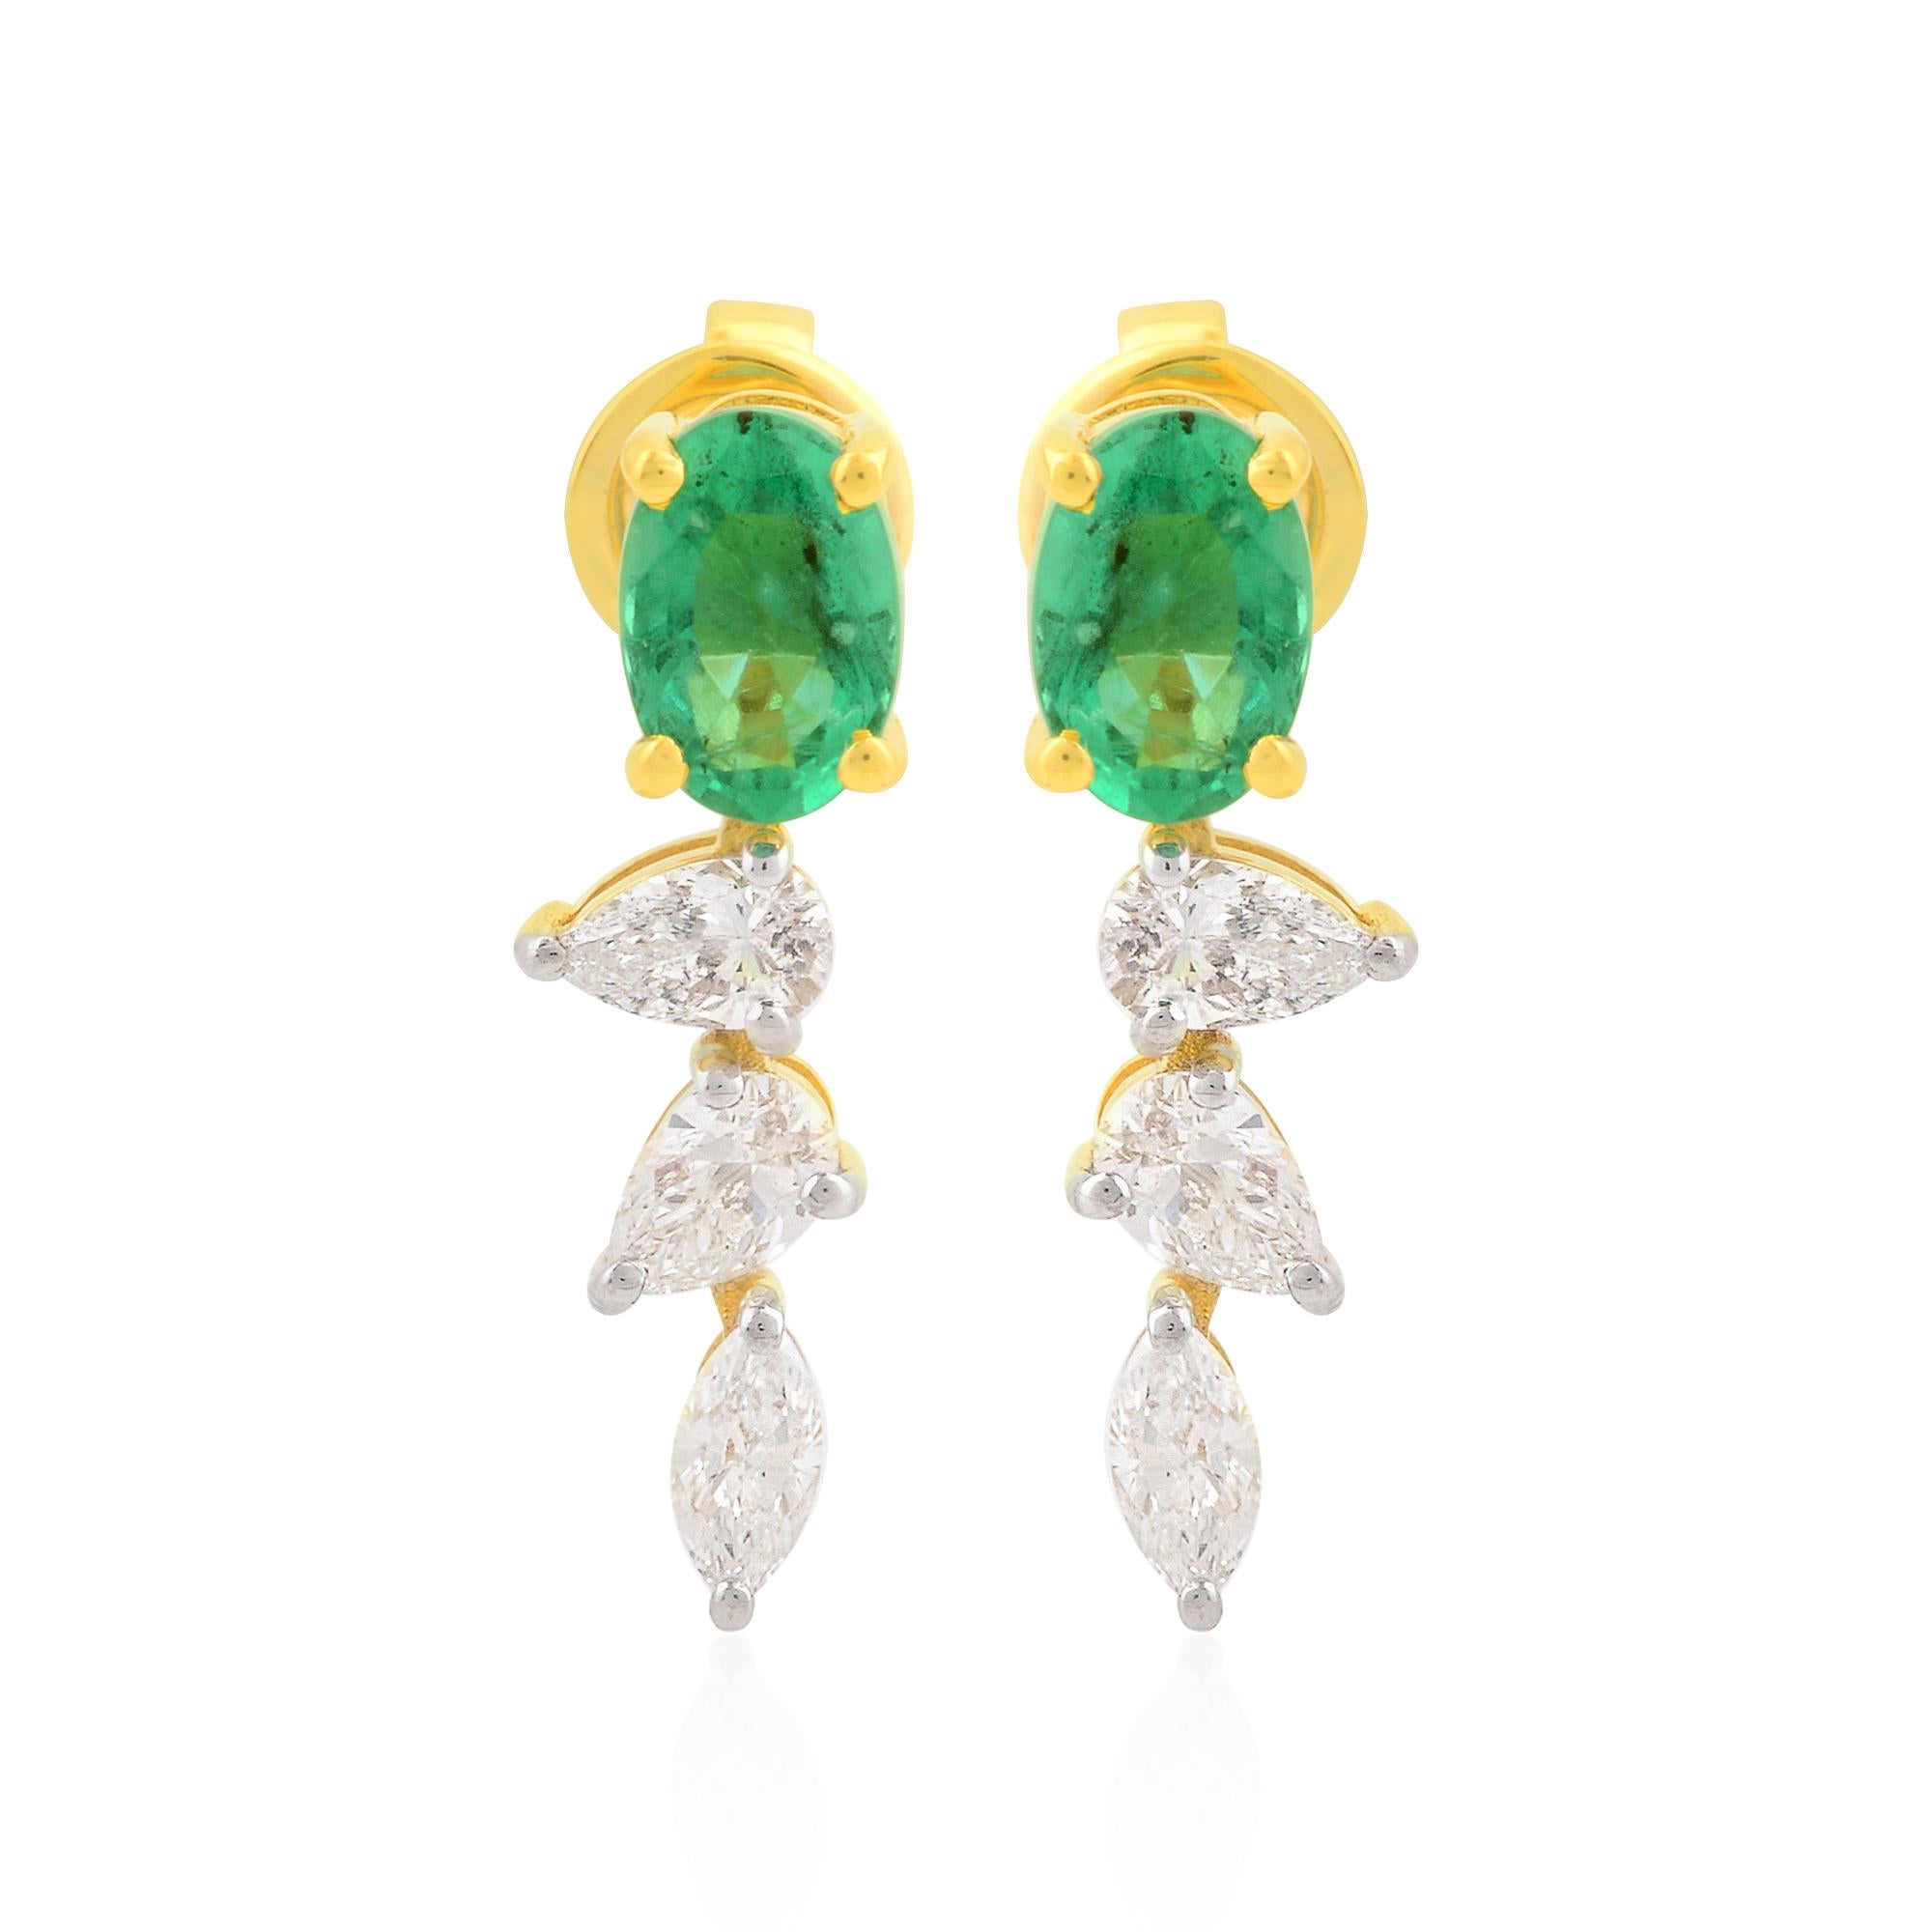 Item Code :- SEE-1754
Gross Wt :- 2.17 gm
14k Yellow Gold Wt :- 1.83 gm
Diamond Wt :- 0.73 carat  ( AVERAGE DIAMOND CLARITY SI1-SI2 & COLOR H-I )
Emerald Wt :- 0.96 carat
Earrings Length :- 17 mm approx.
✦ Sizing
.....................
We can adjust